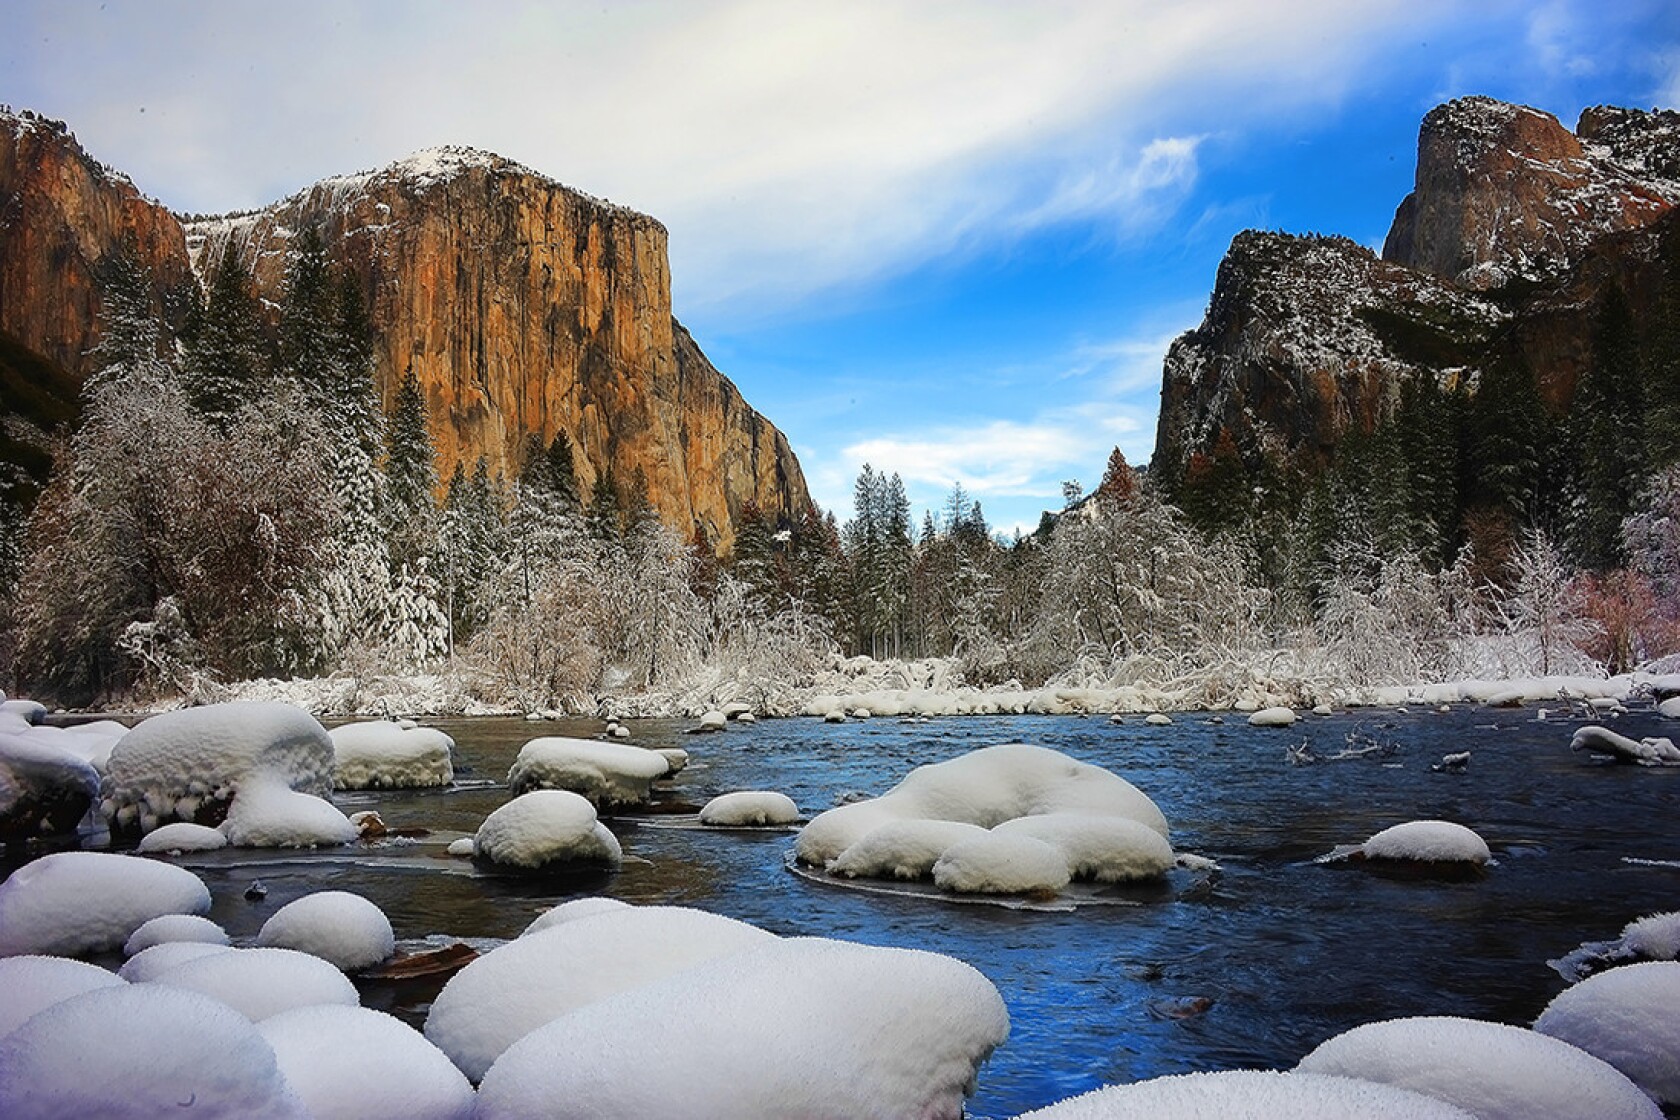 Want to see winter in Yosemite? Check out these snowy photos and go